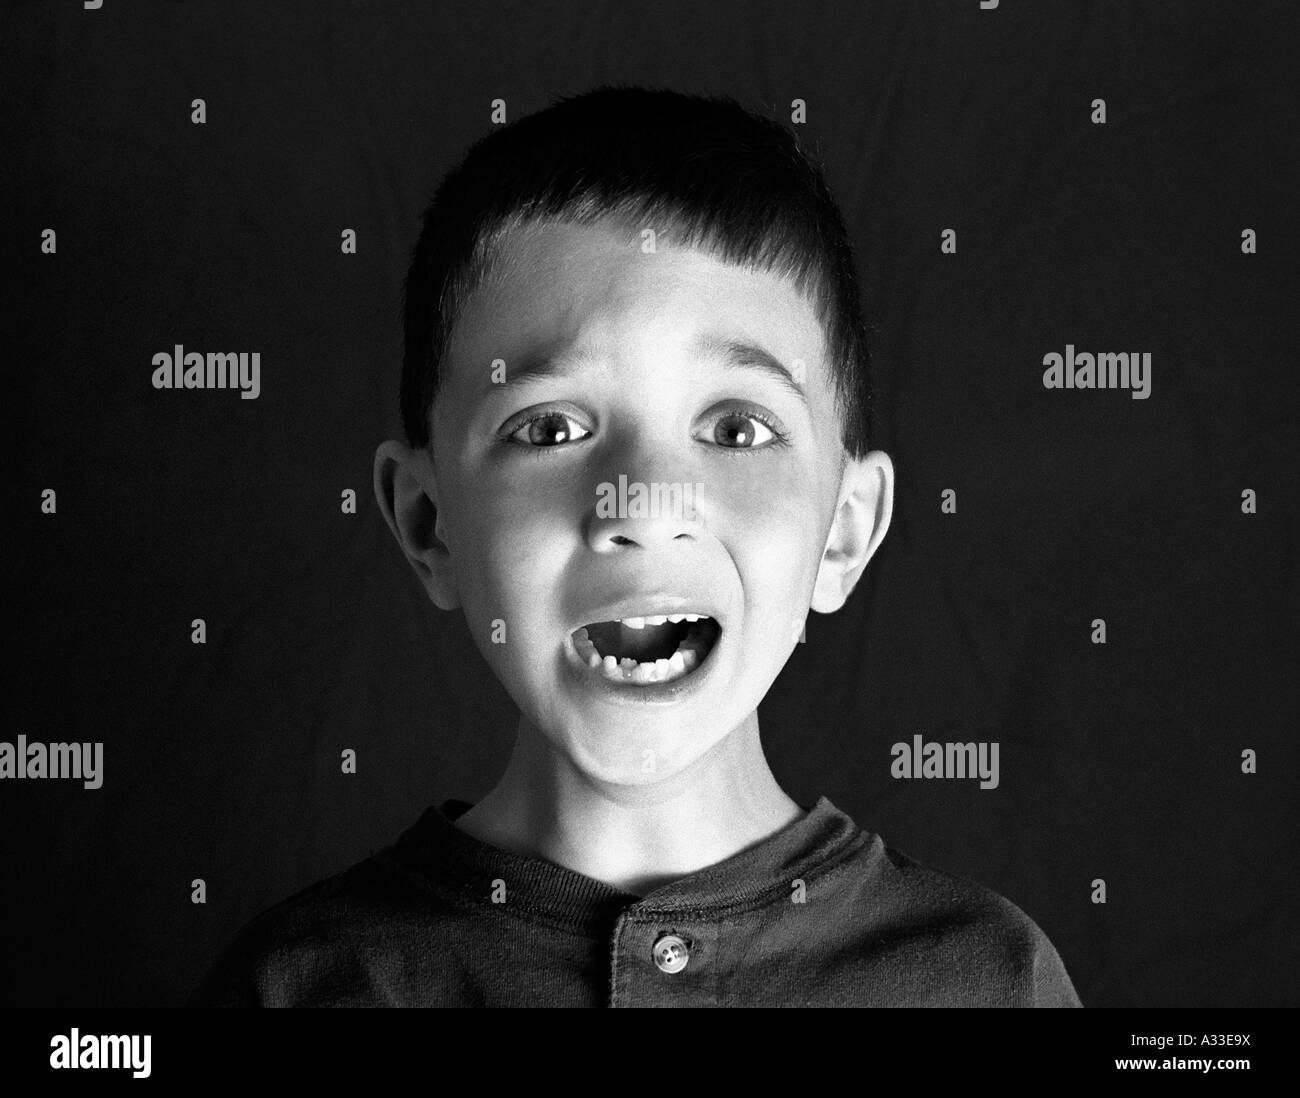 Young boy making a goofy silly face. Stock Photo